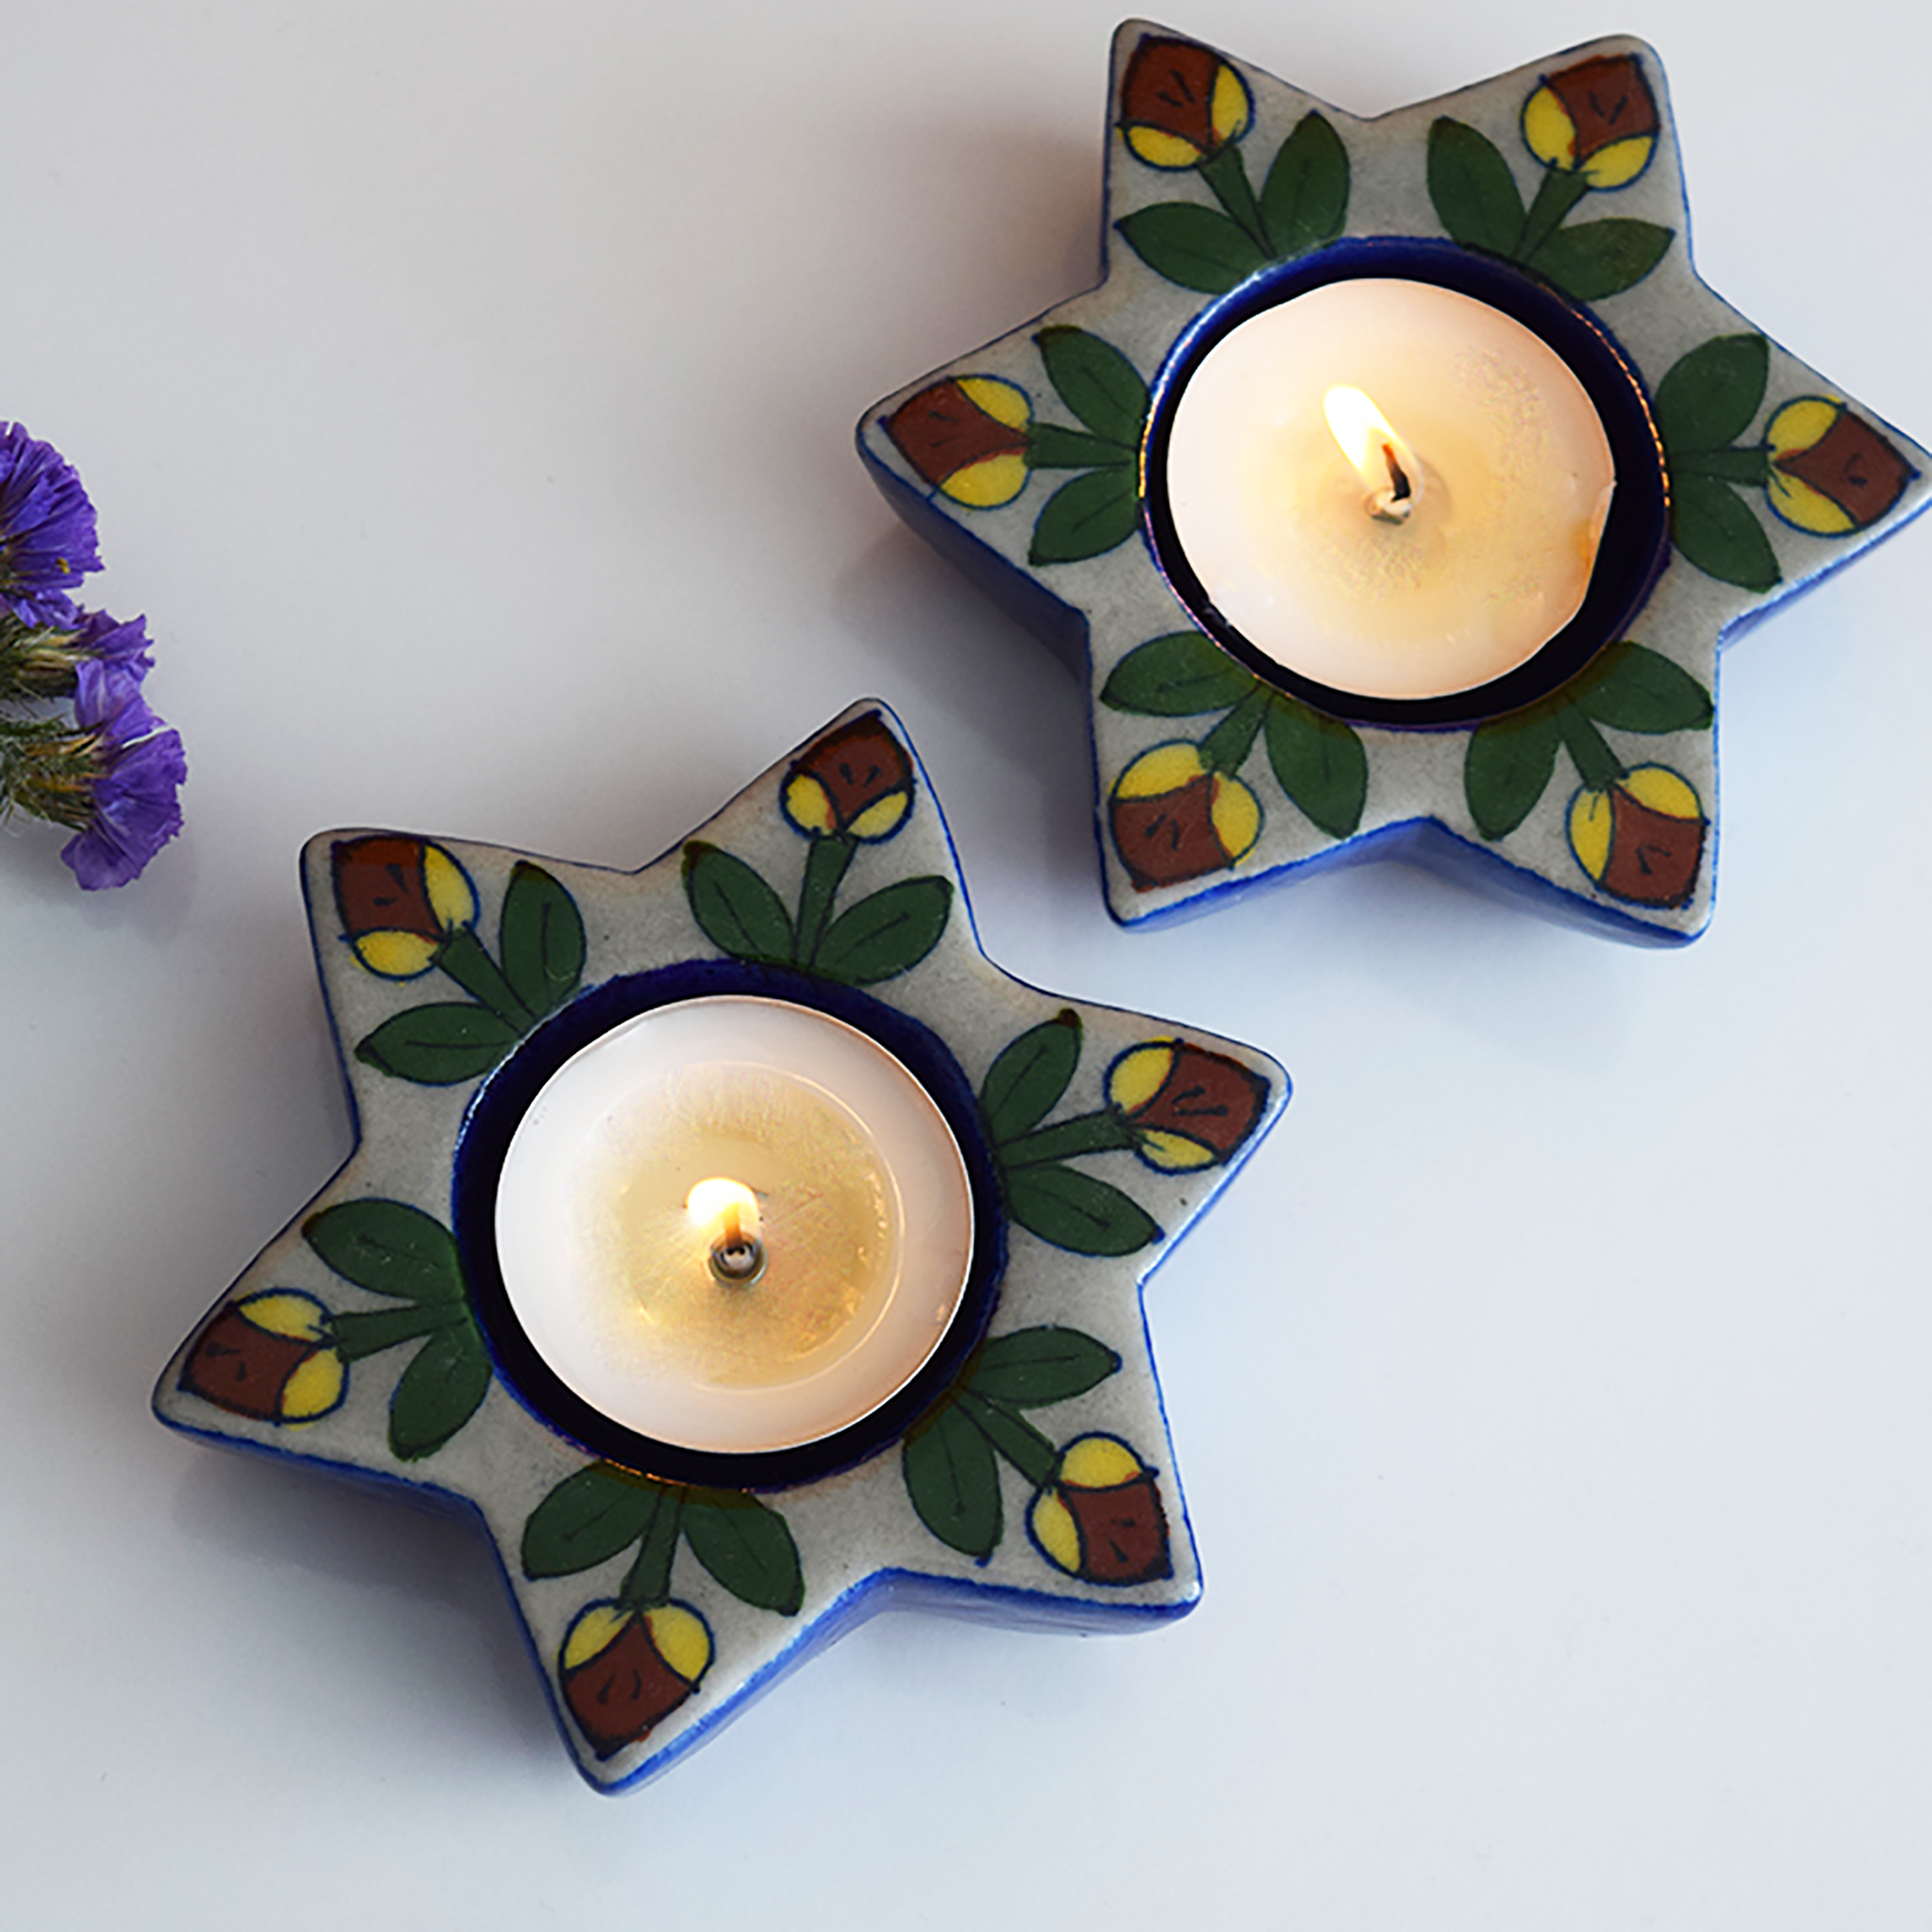 Blue star shaped diya with yellow and red hand painted flowers